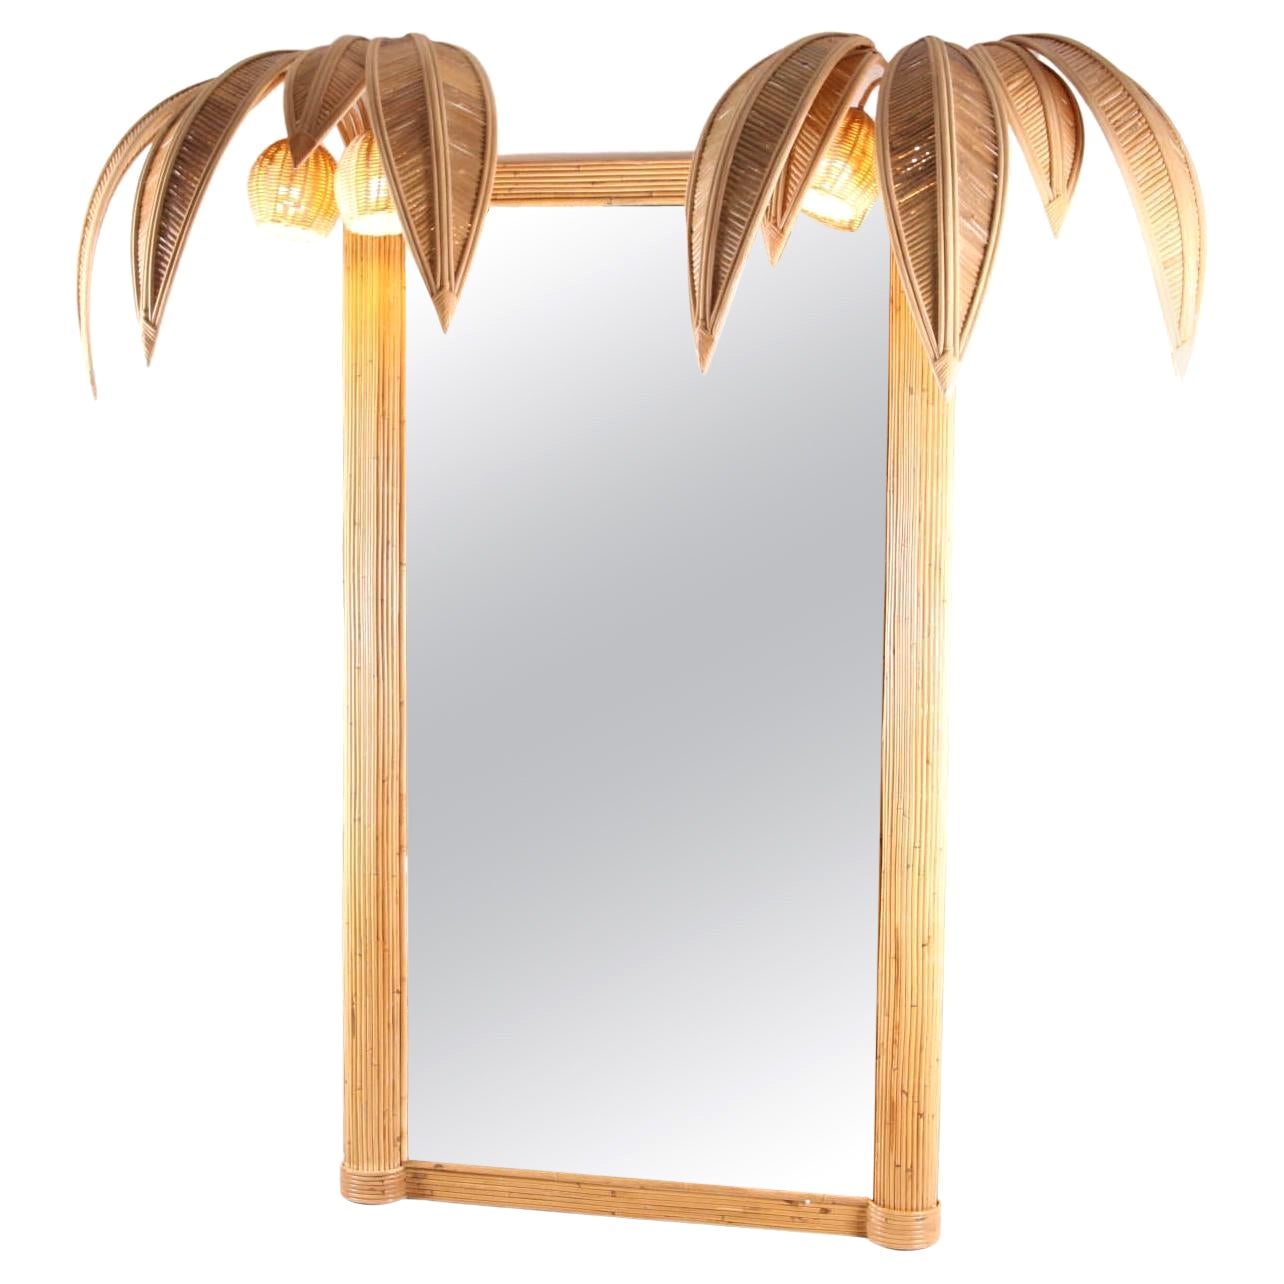 Large Lumious Rattan Double Coconut Tree / Palm Tree Mirror For Sale at ...